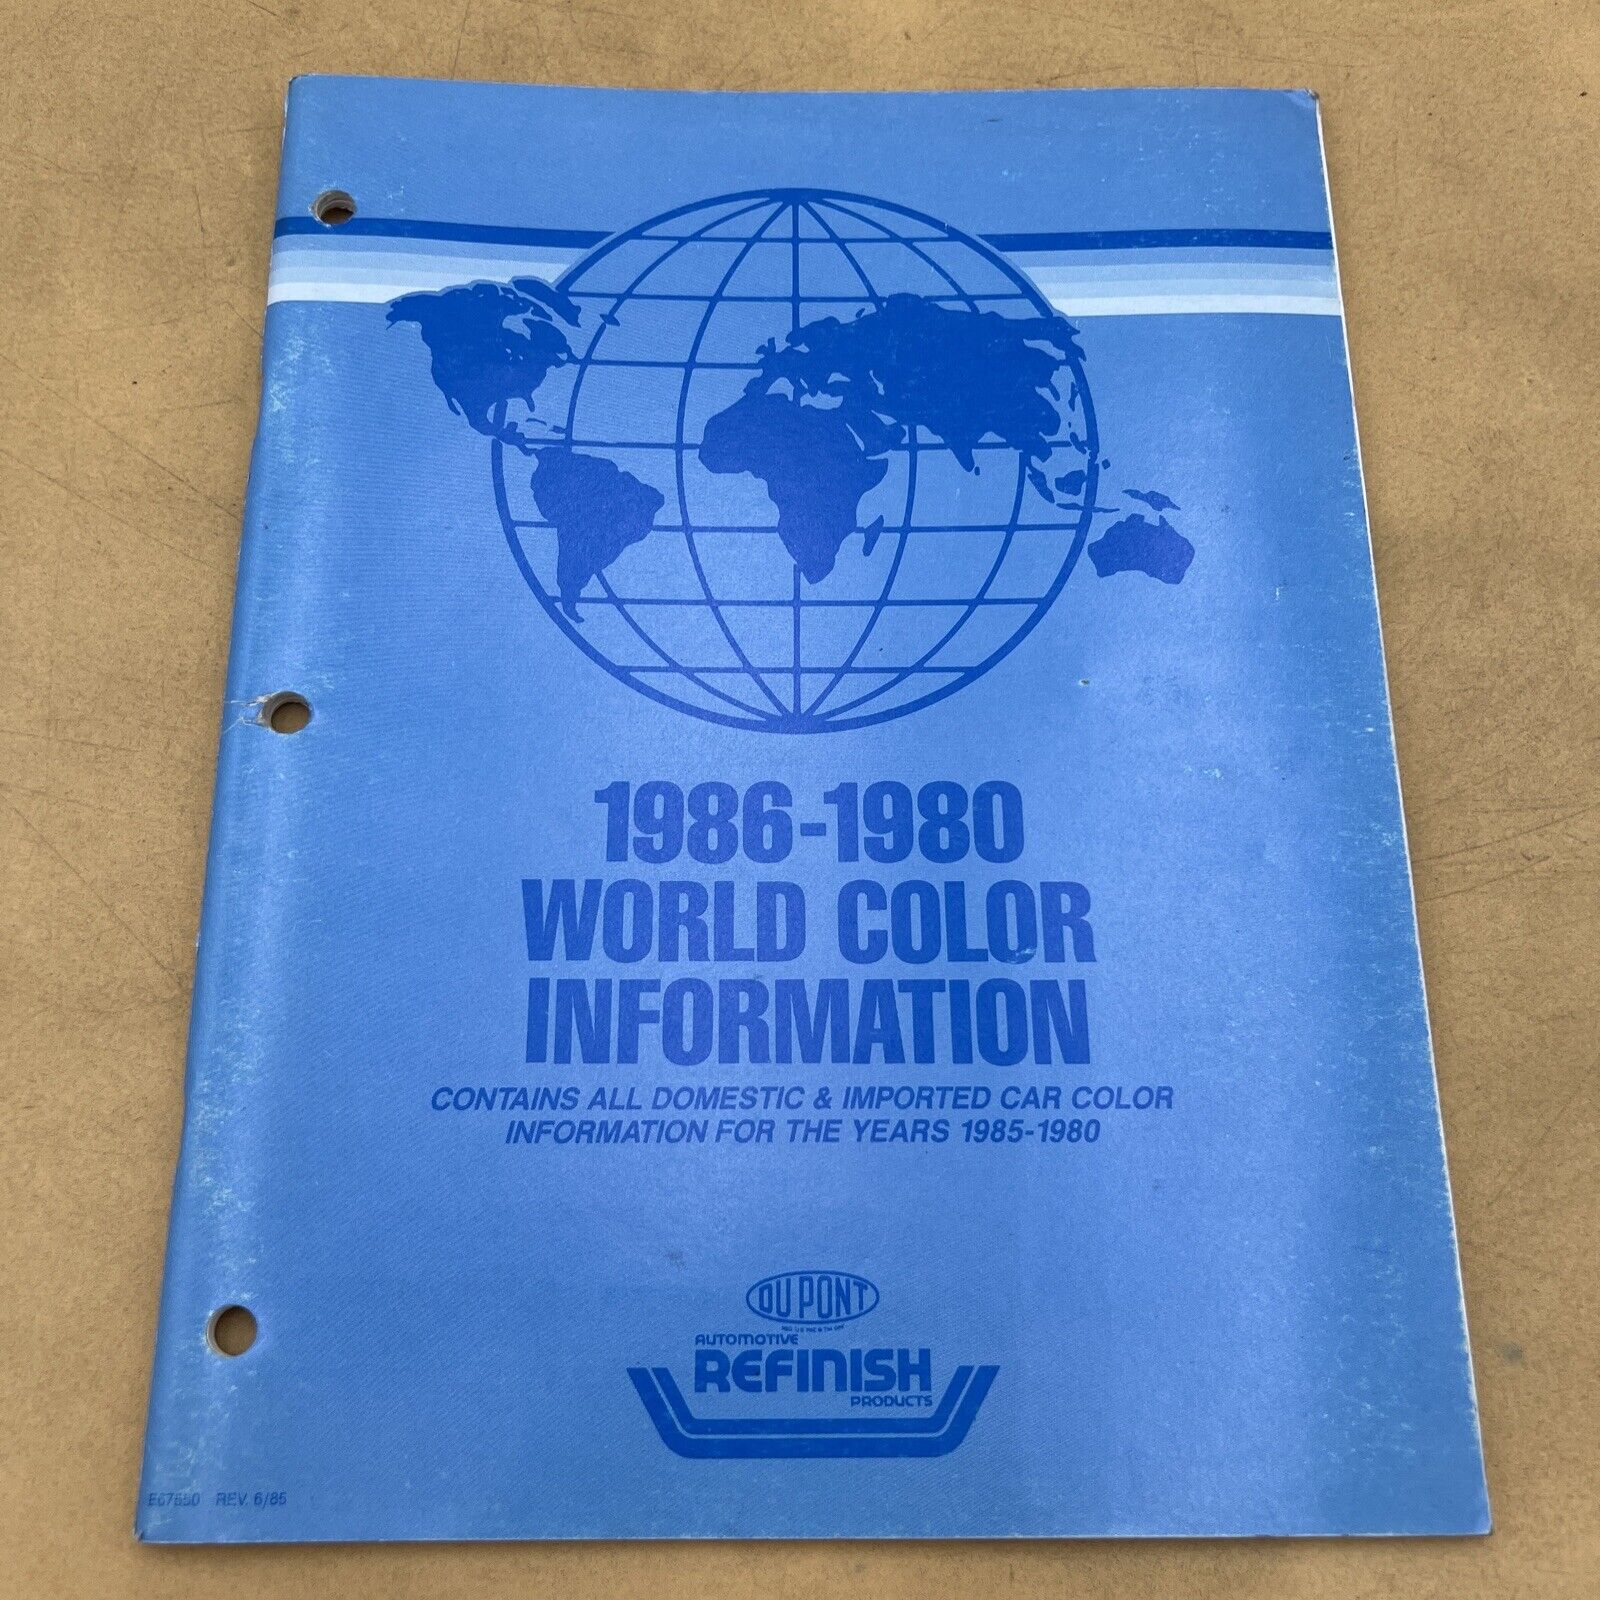 1980-1985 World Color Information Book for all Domestic and Imported Cars